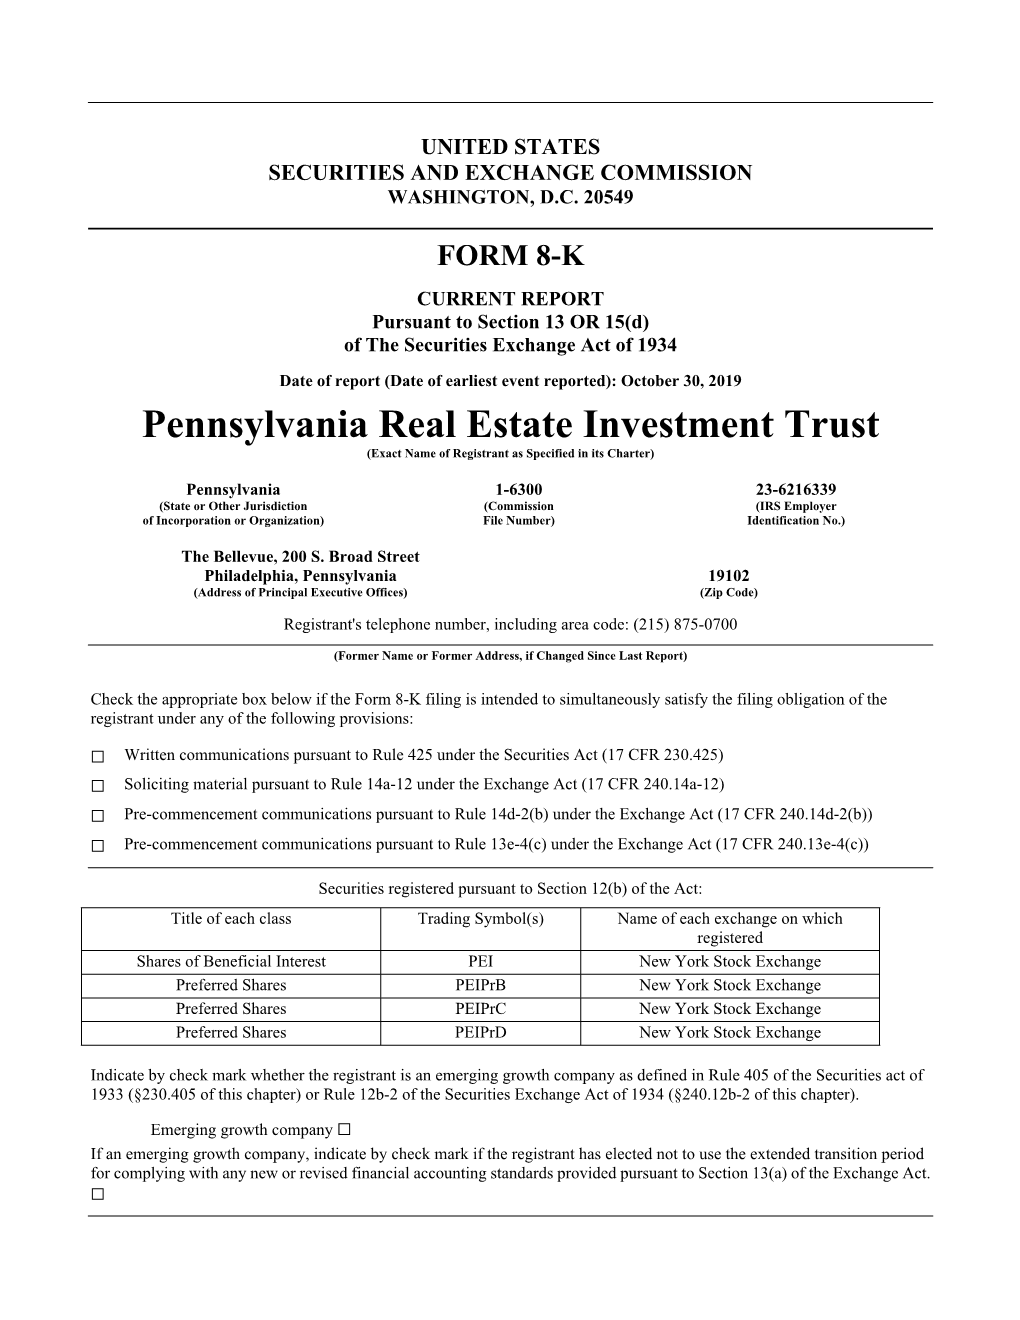 Pennsylvania Real Estate Investment Trust (Exact Name of Registrant As Specified in Its Charter)